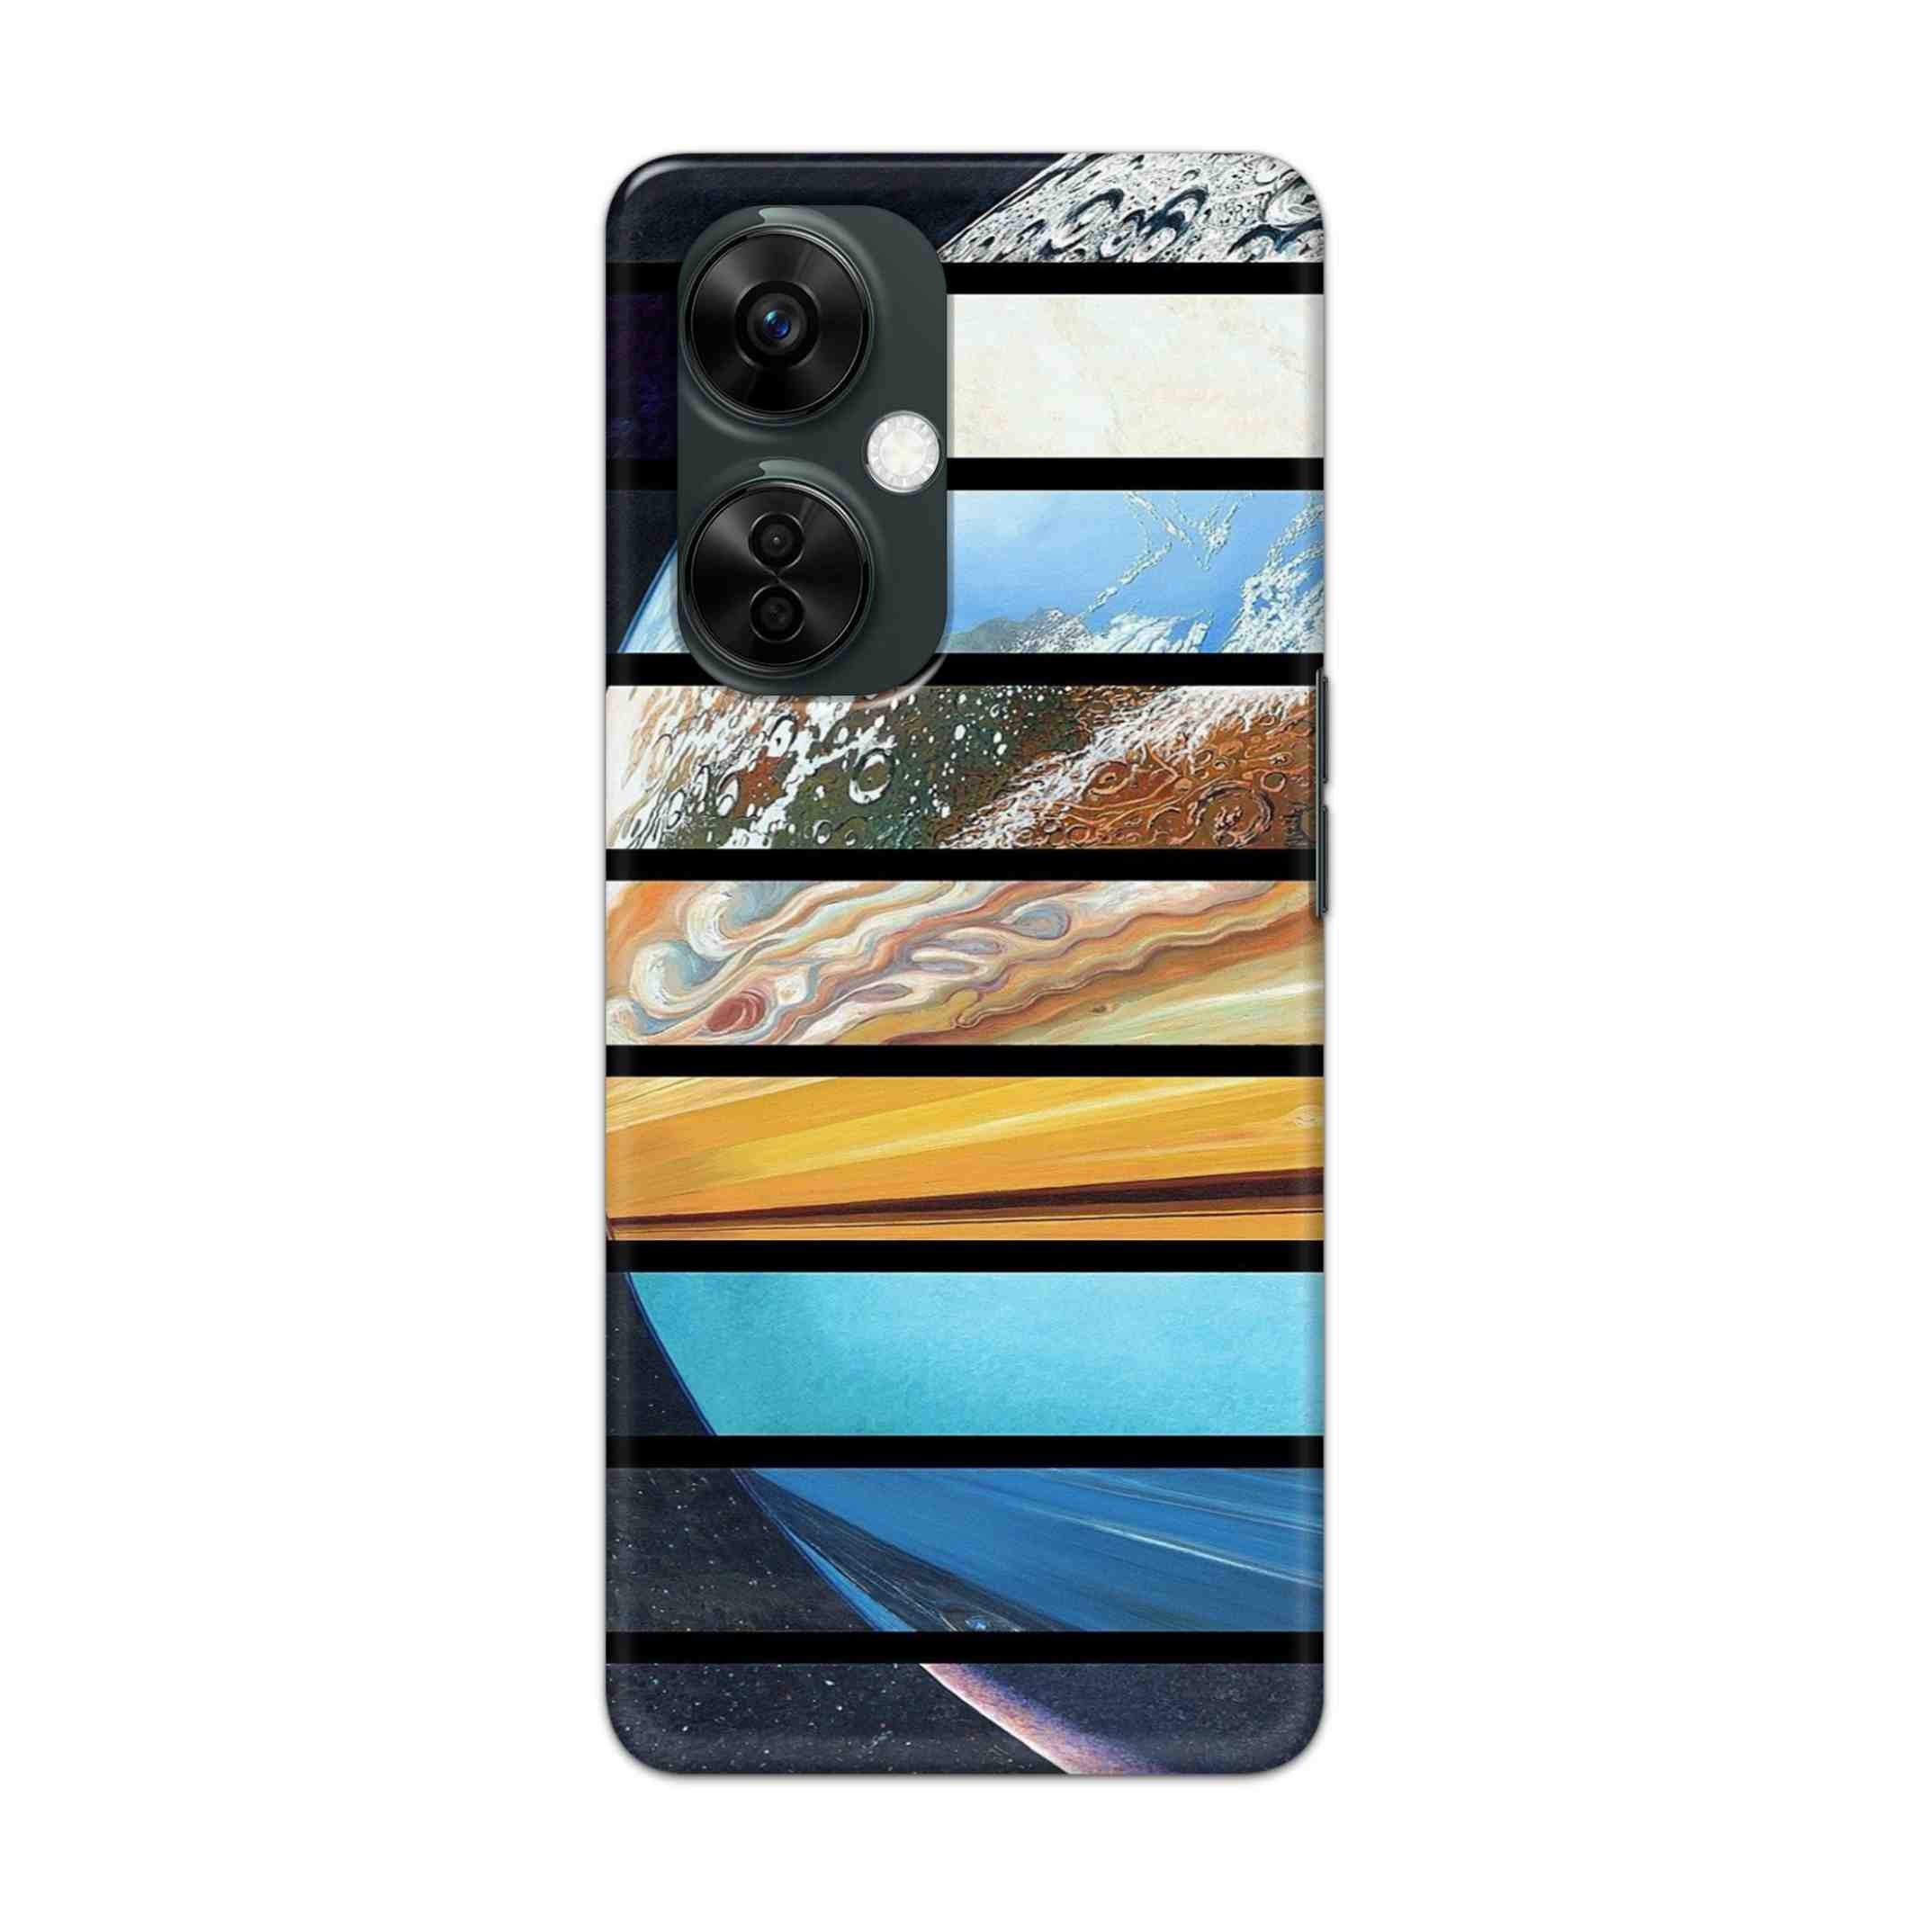 Buy Colourful Earth Hard Back Mobile Phone Case Cover For Oneplus Nord CE 3 Lite Online